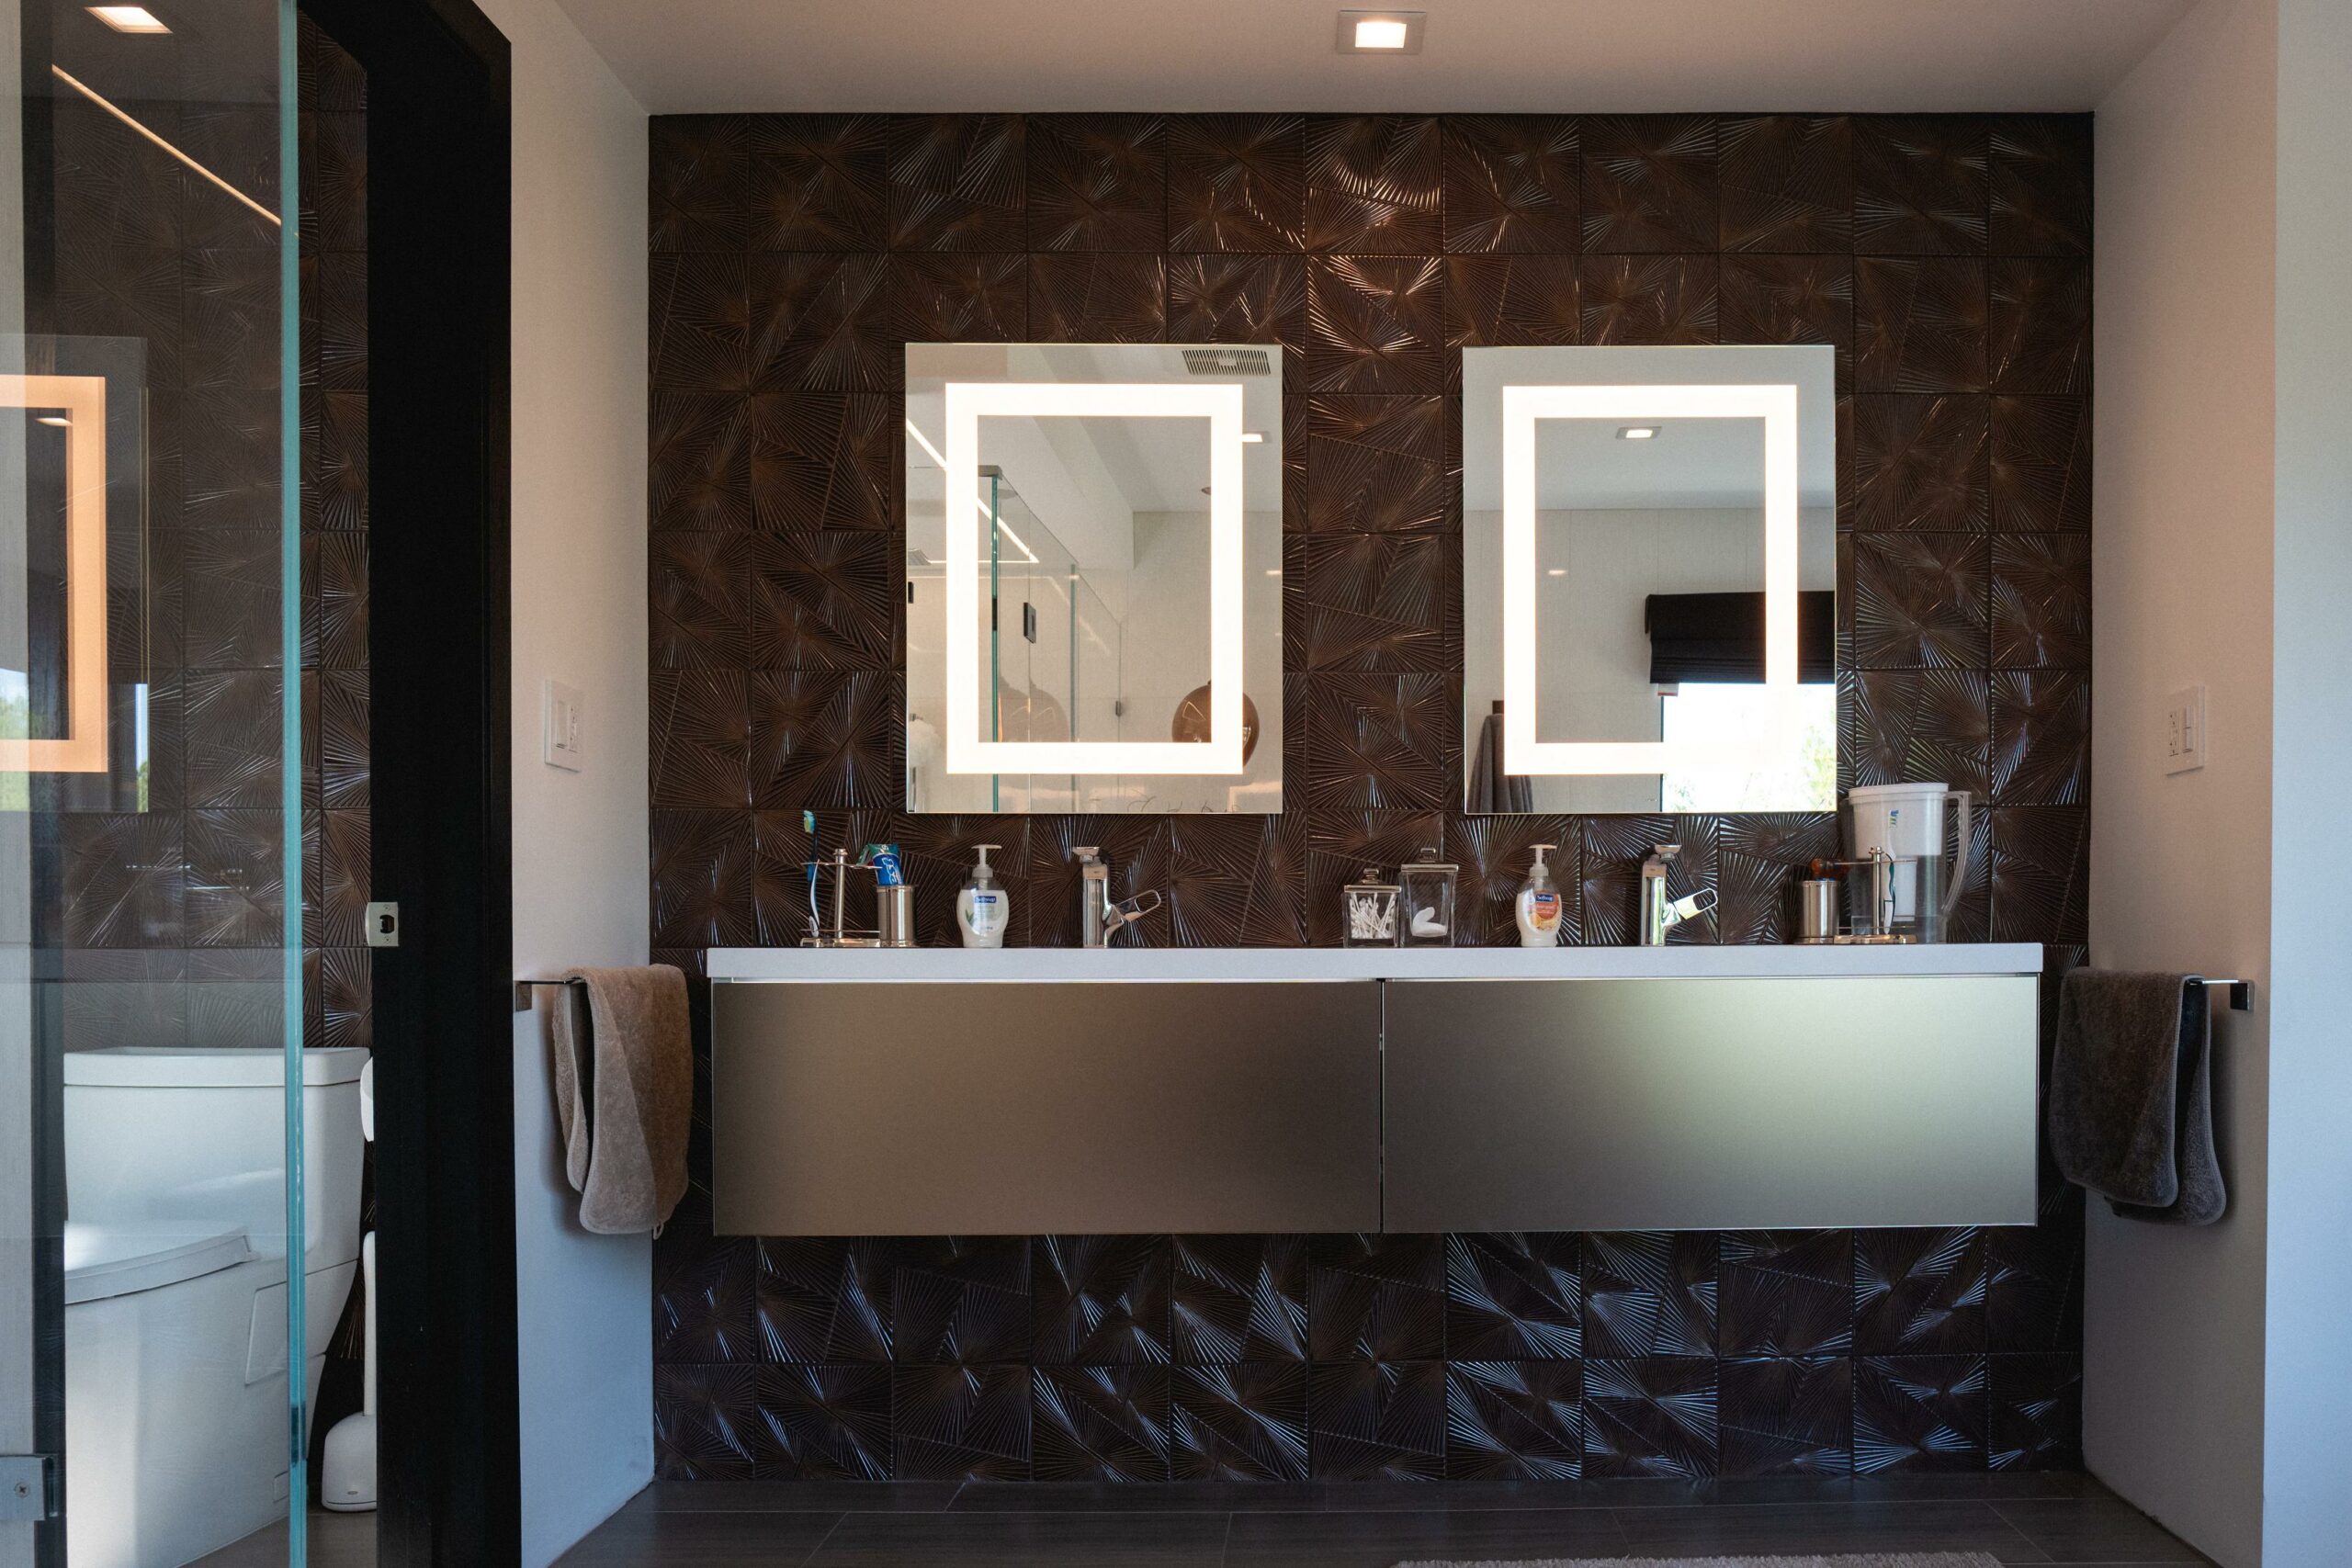 Modern bathroom with textured walls and double vanity mirrors.